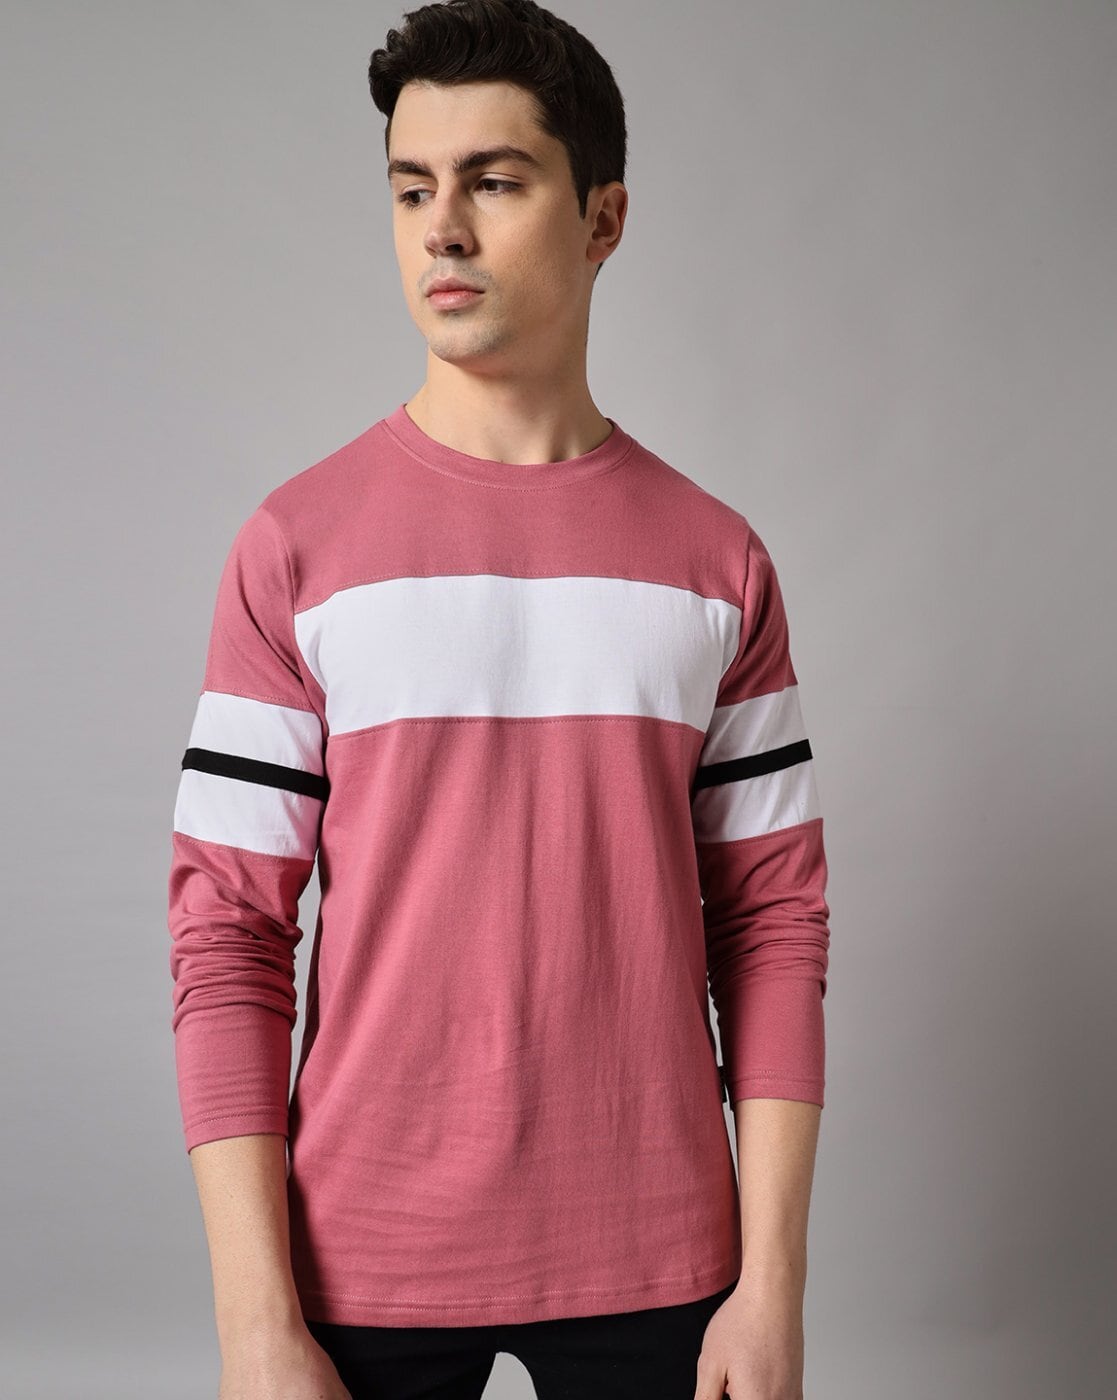 Buy Pink Tshirts for Men by The Dry State Online